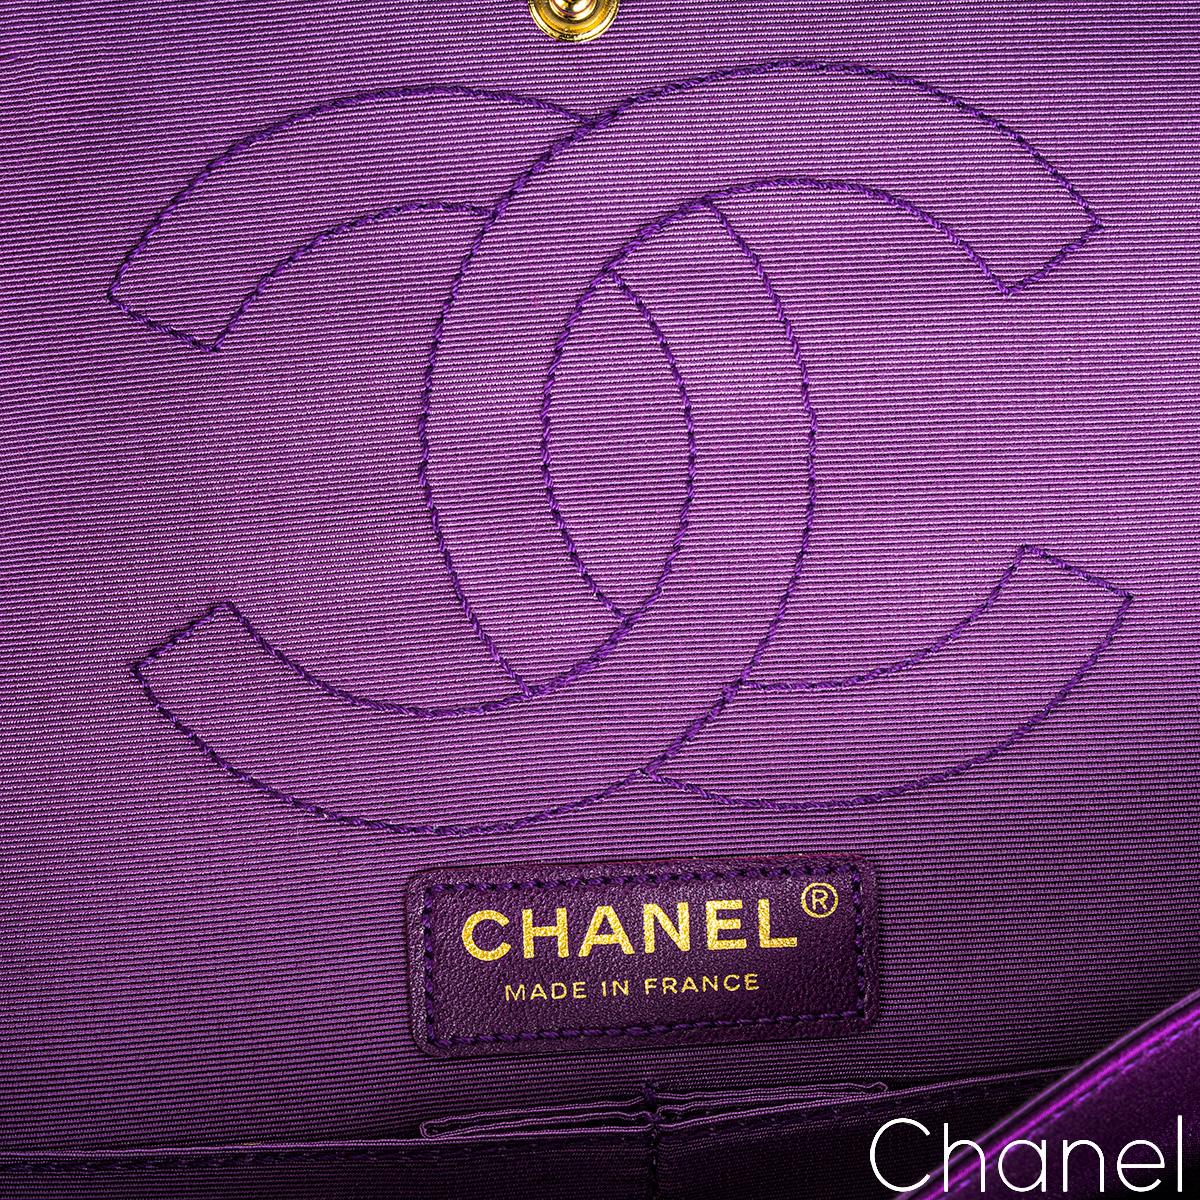 Chanel Purple Satin 2.55 Reissue Small 255 Bag In Excellent Condition For Sale In London, GB